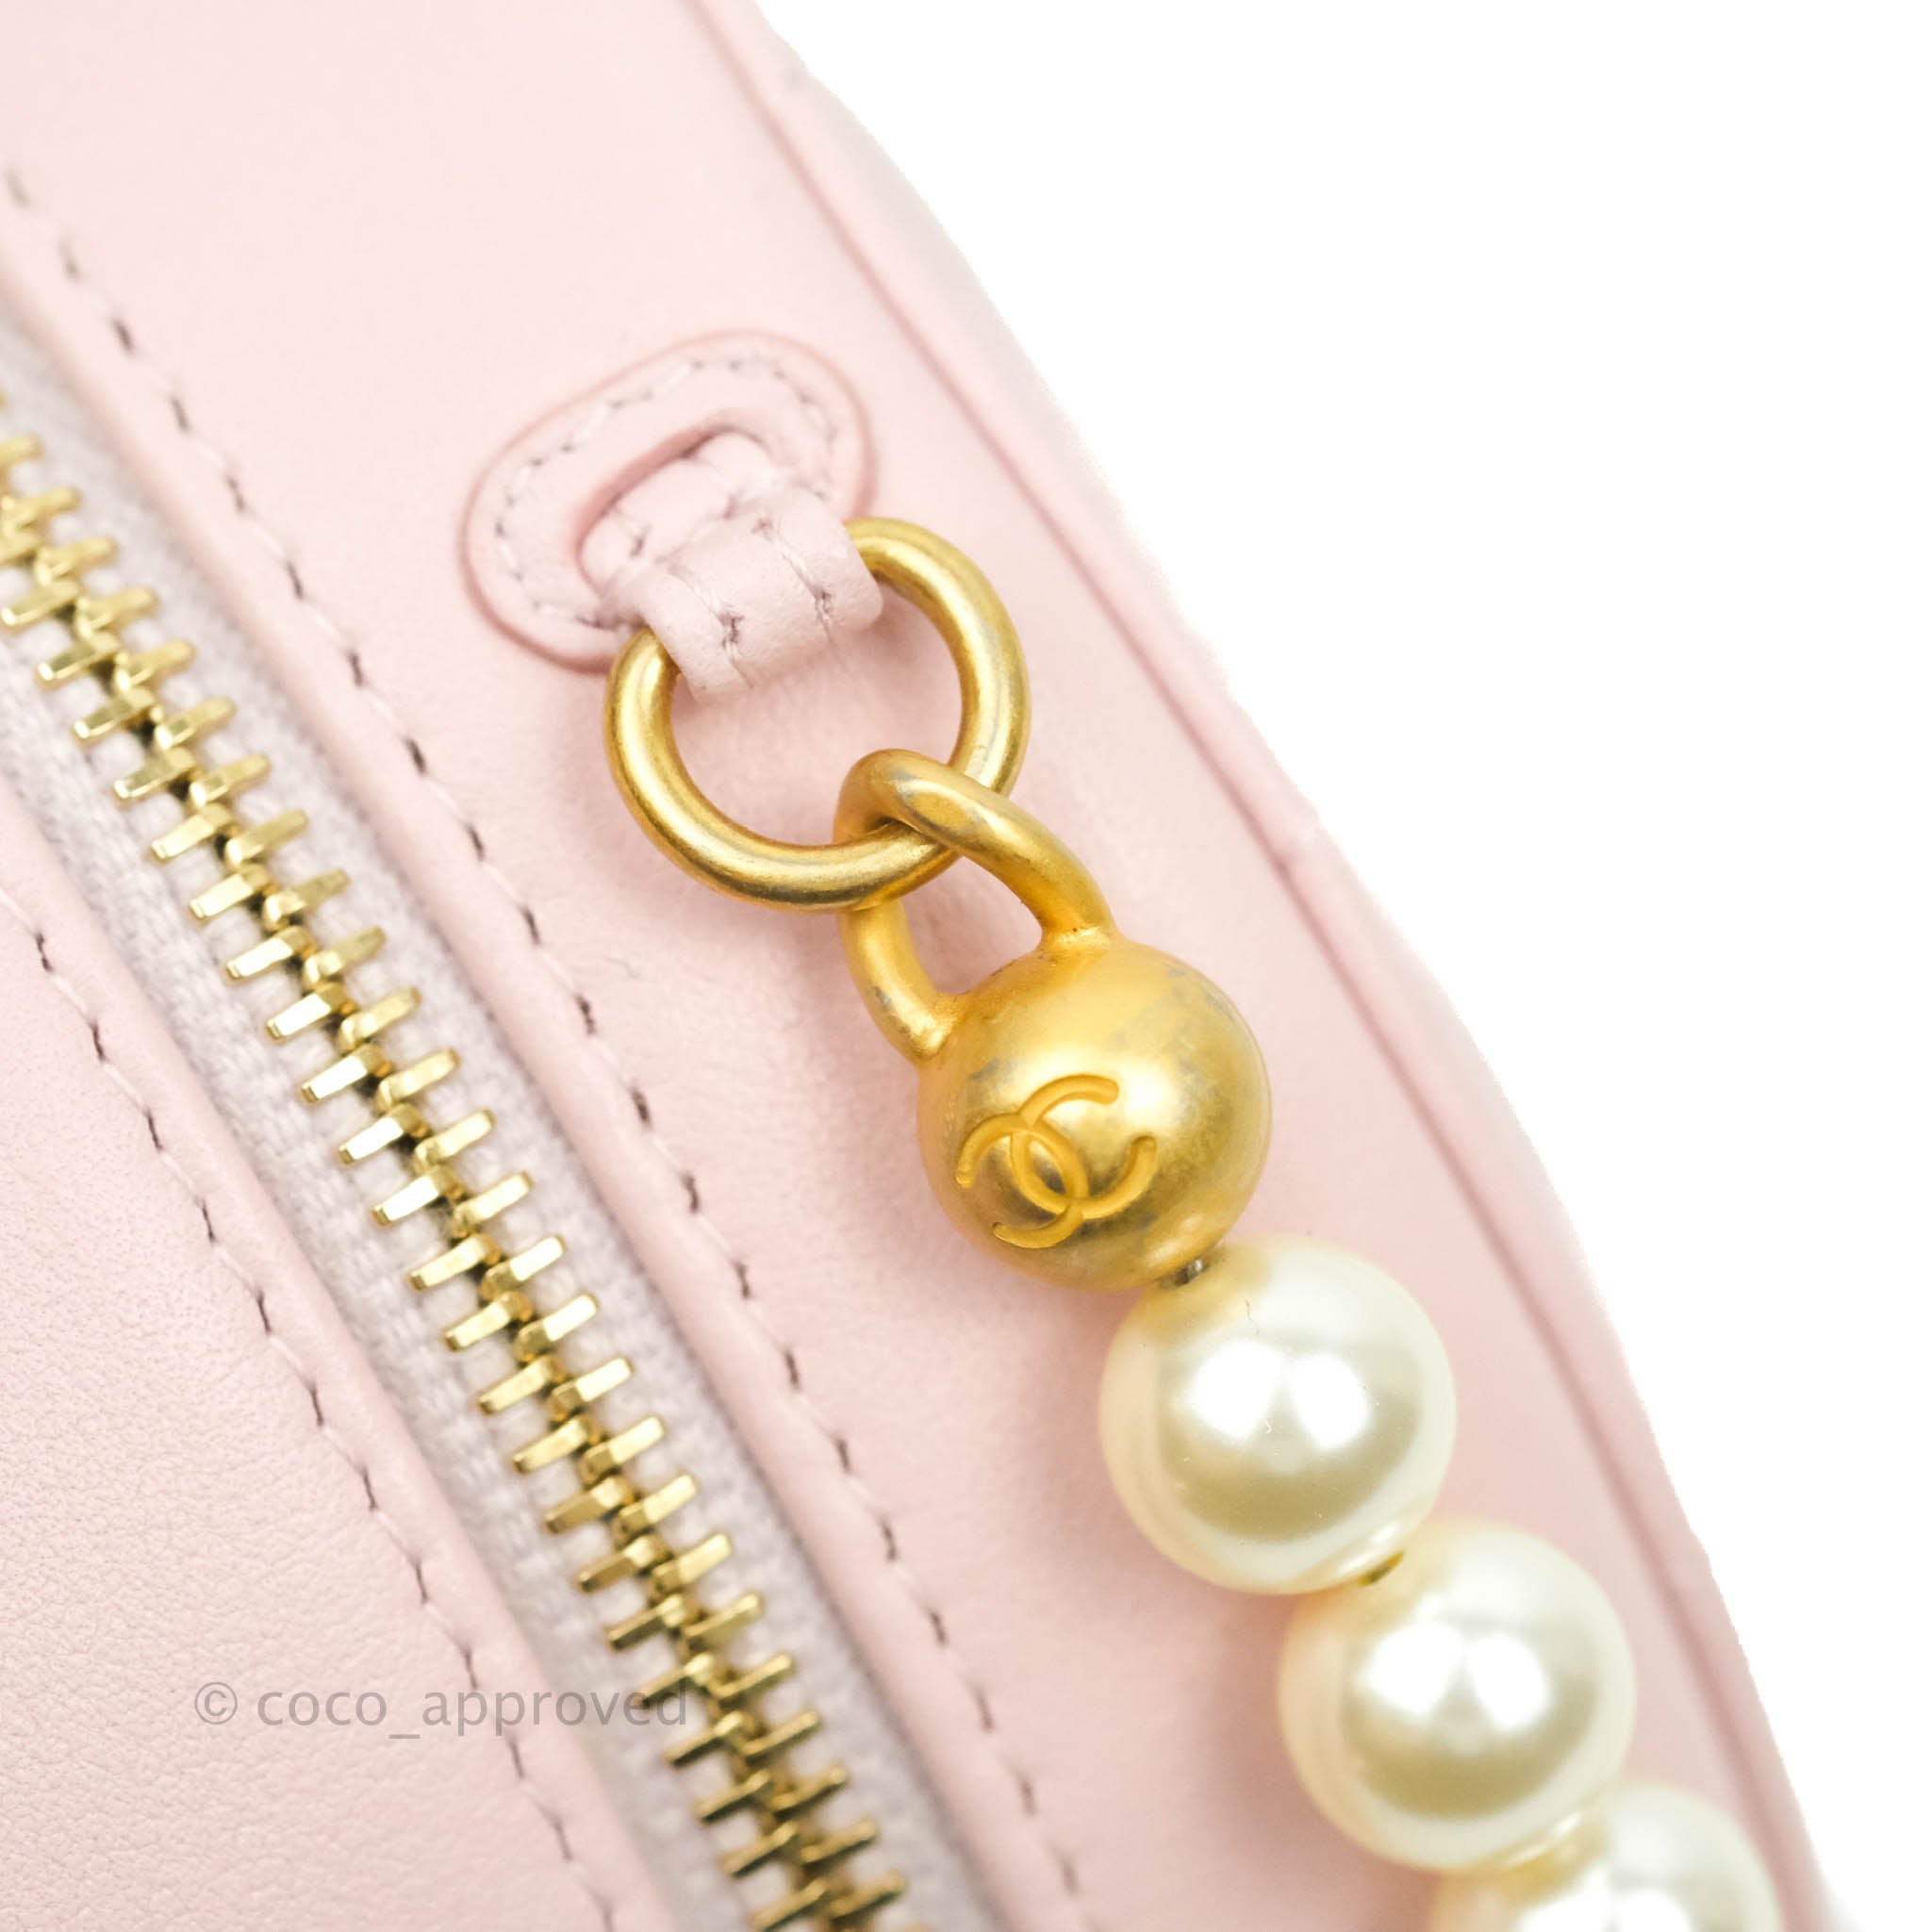 Chanel Quilted Round Clutch with Pearl Chain Light Pink Calfskin